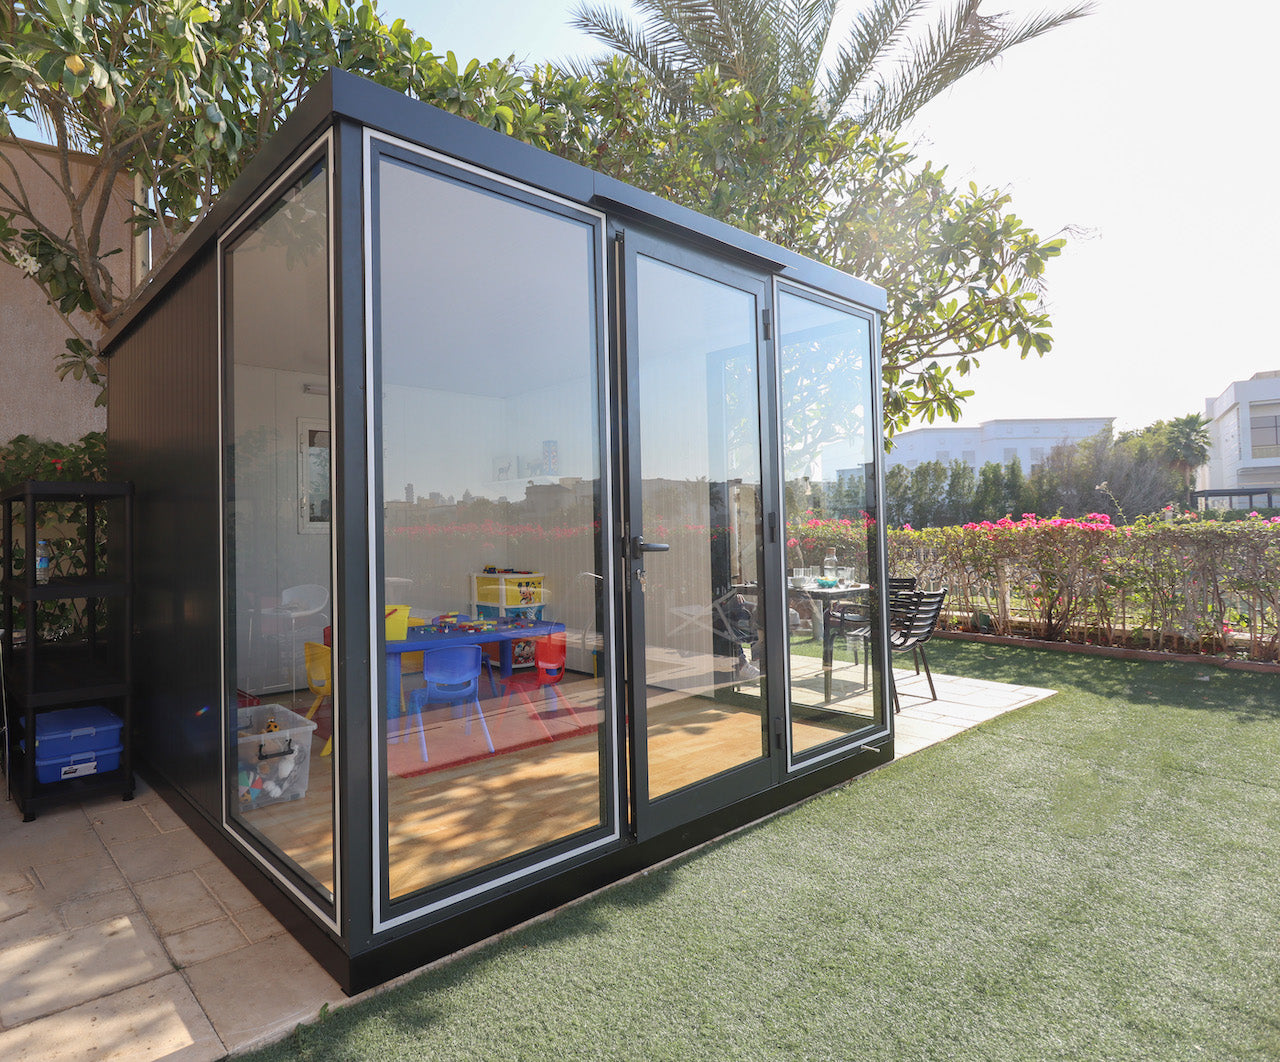 Duramax 10x10 Garden Glass Room, Outdoor Office, Shelter, Playroom and Insulated Building